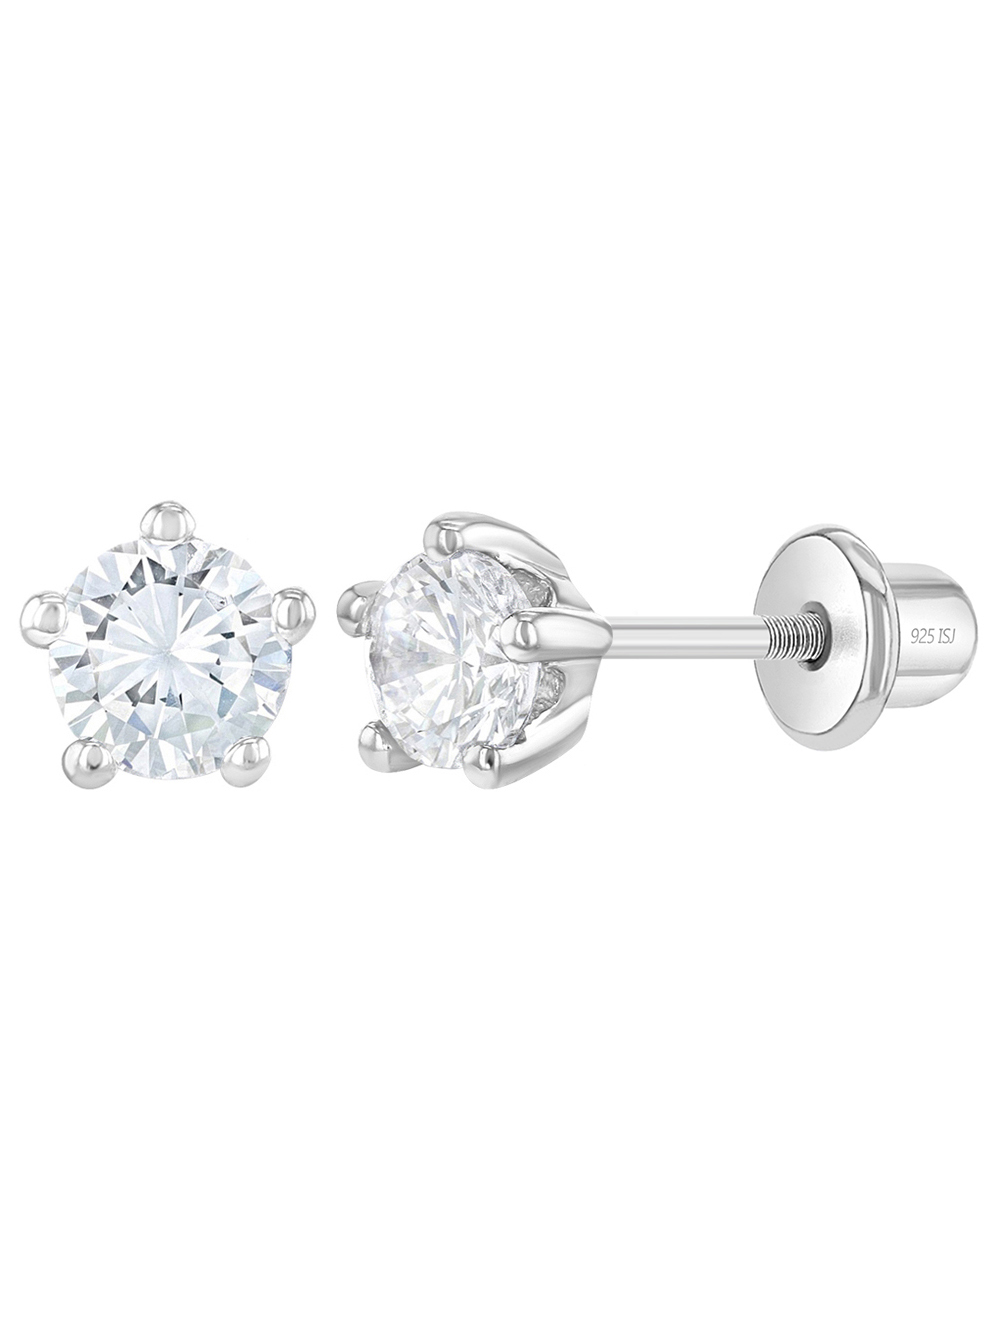 FB Jewels Solid Sterling Silver 4mm Round Snap Set CZ Cubic Zirconia Stud Earrings 